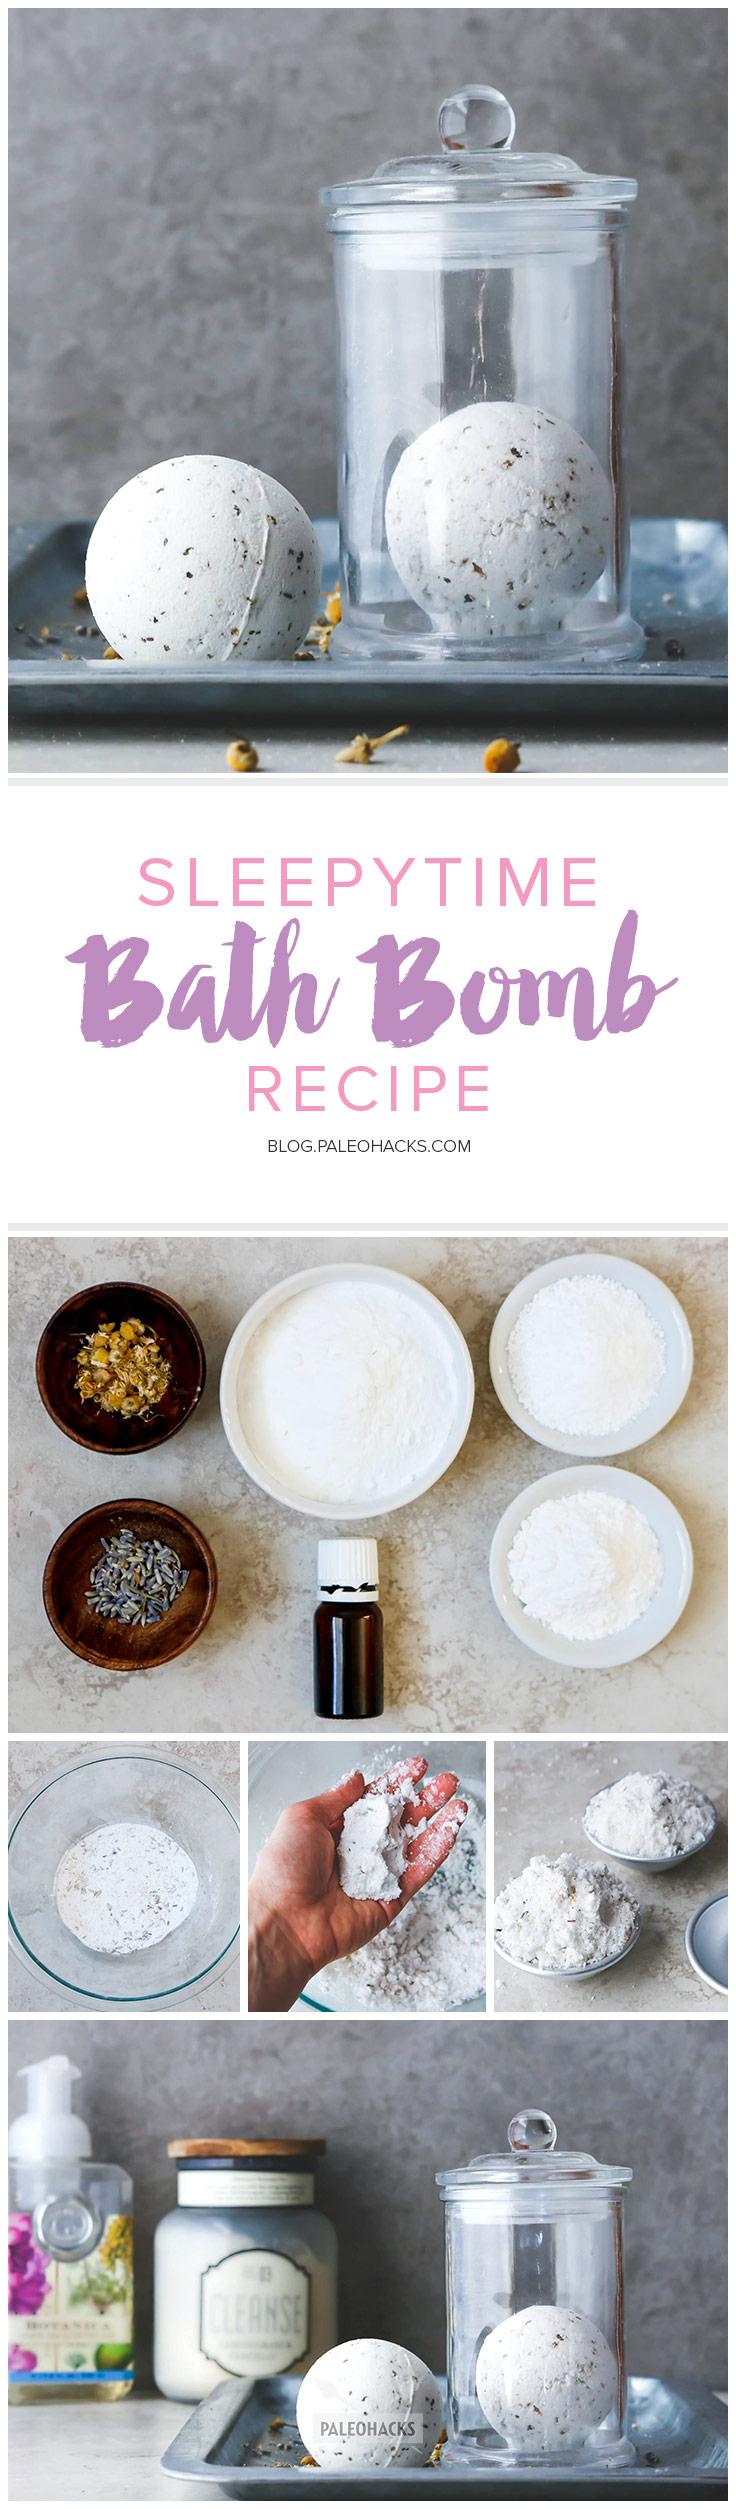 Ease into a restful sleep with these DIY natural fizzy bath bombs made from calming chamomile and lavender.